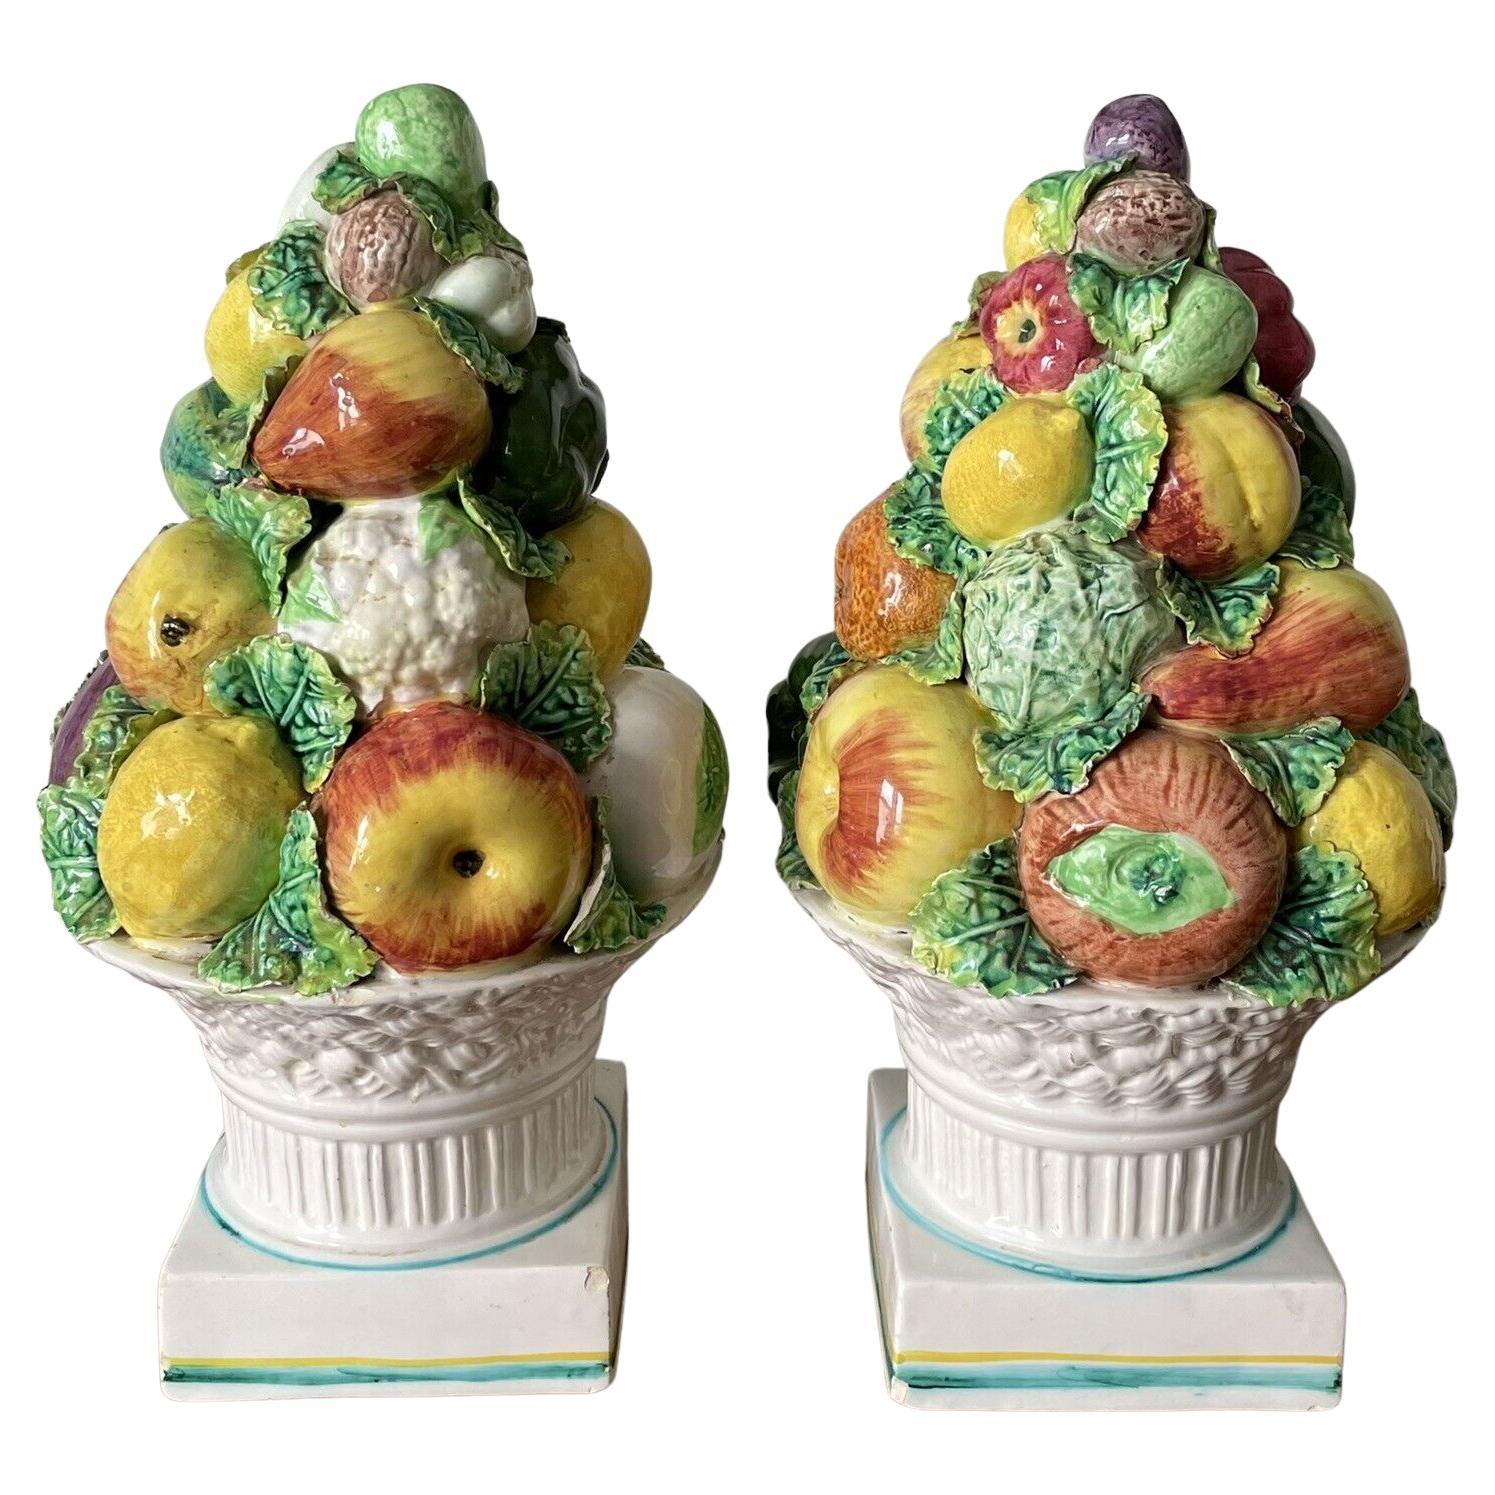 Pair of Majolica glazed ceramic fruit & vegetable topiaries. Made in Italy, featuring a mix of fruits, vegetables and greens towering over a woven basket base.



